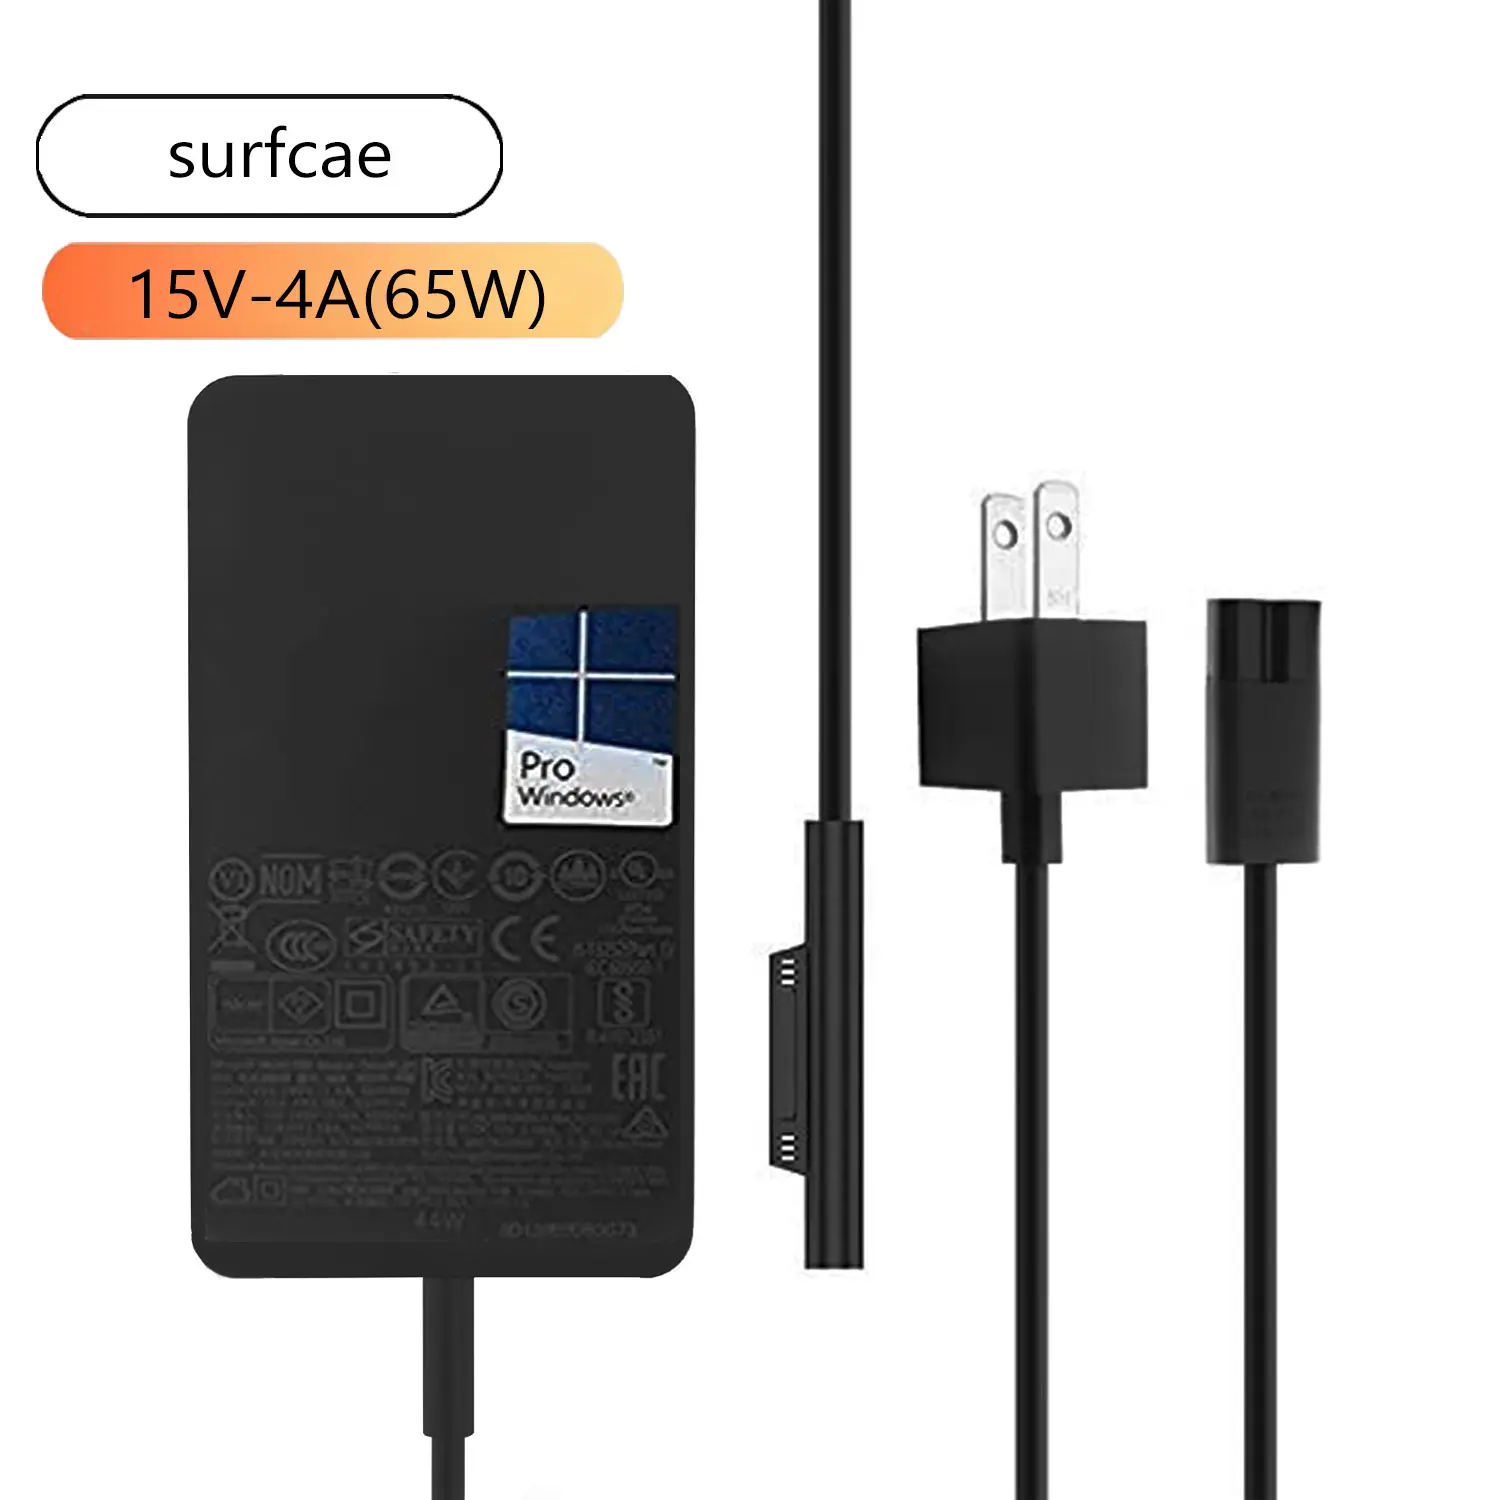 65W 19V 3.42A Laptop Charger Universal Power Adapter For HP Dell Lenovo Samsung Asus Acer Toshiba